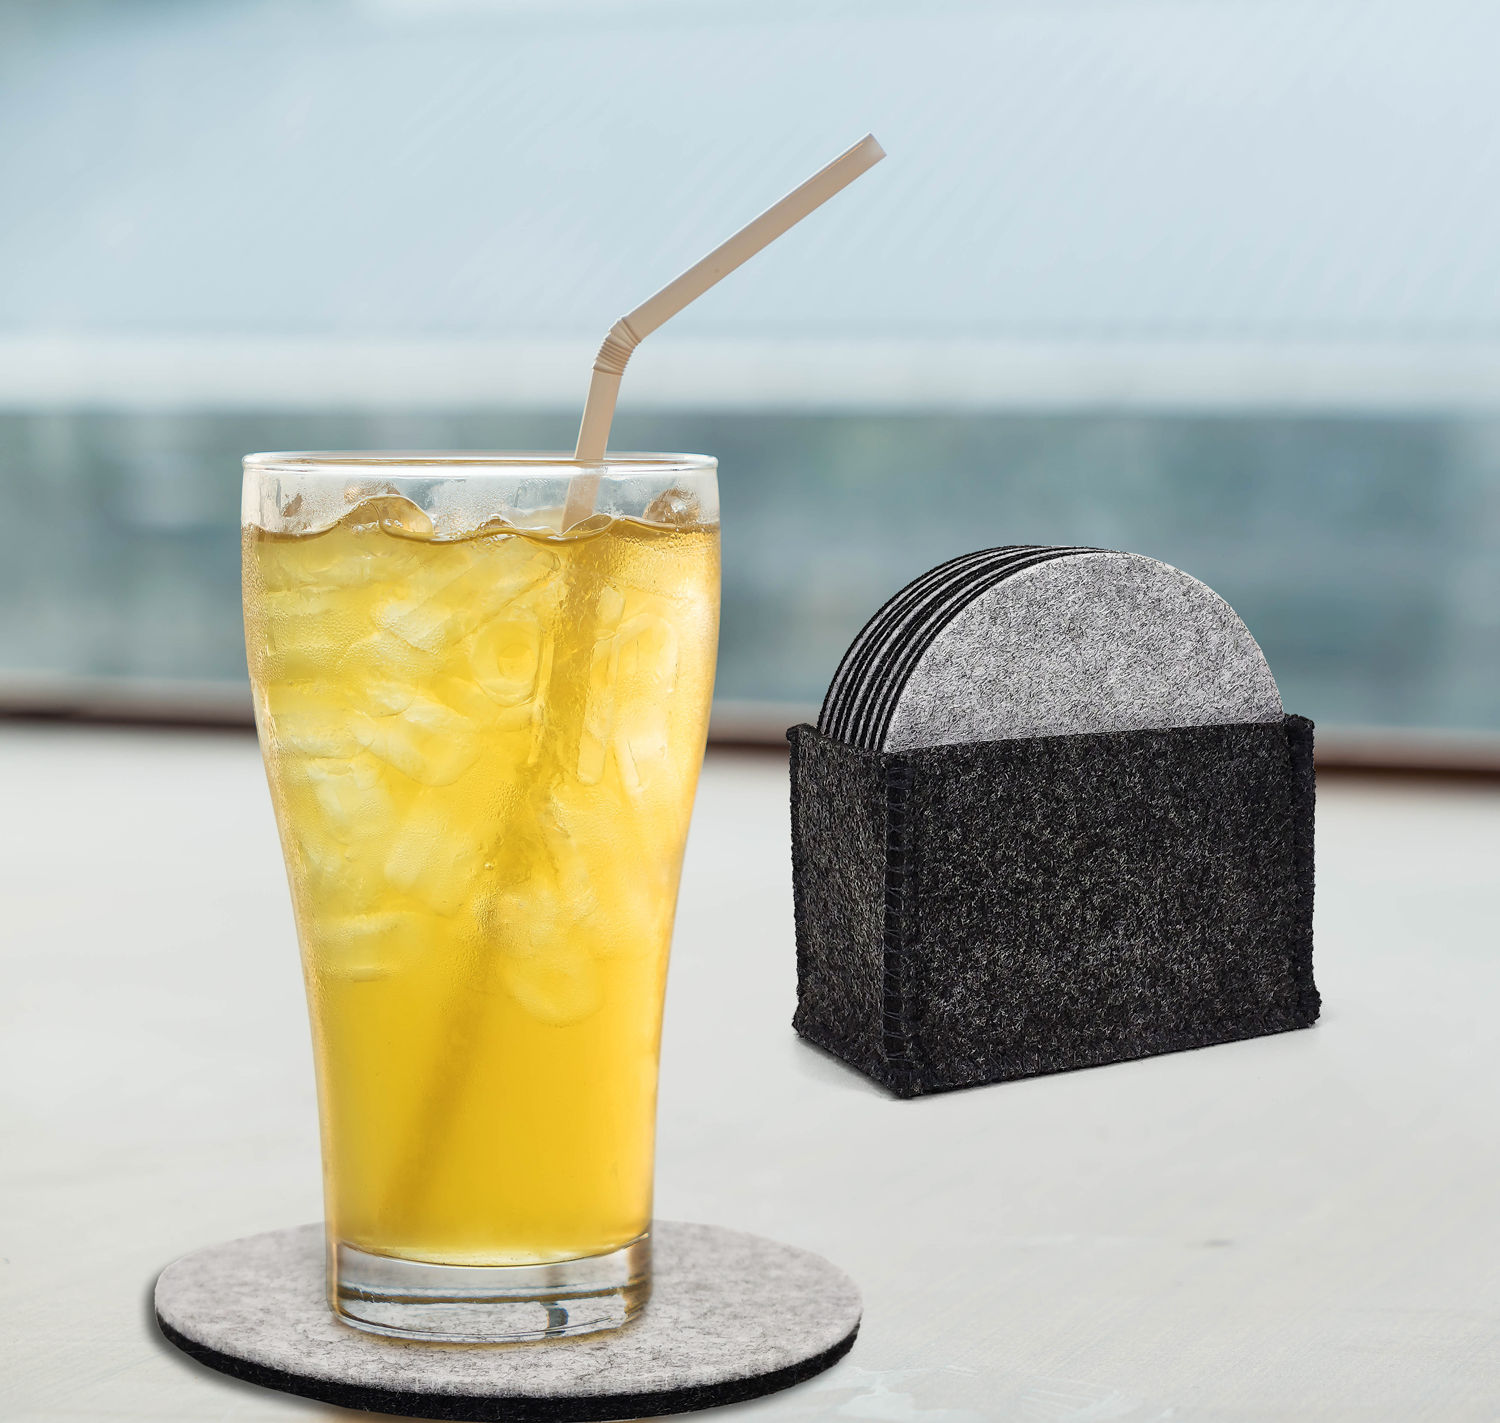 Felt Drink Coaster Set with Holder/Modern Decorative Drink Coasters/Table Coasters for Drink Absorbant to Protect Furniture & Tables from Drink Featured Image